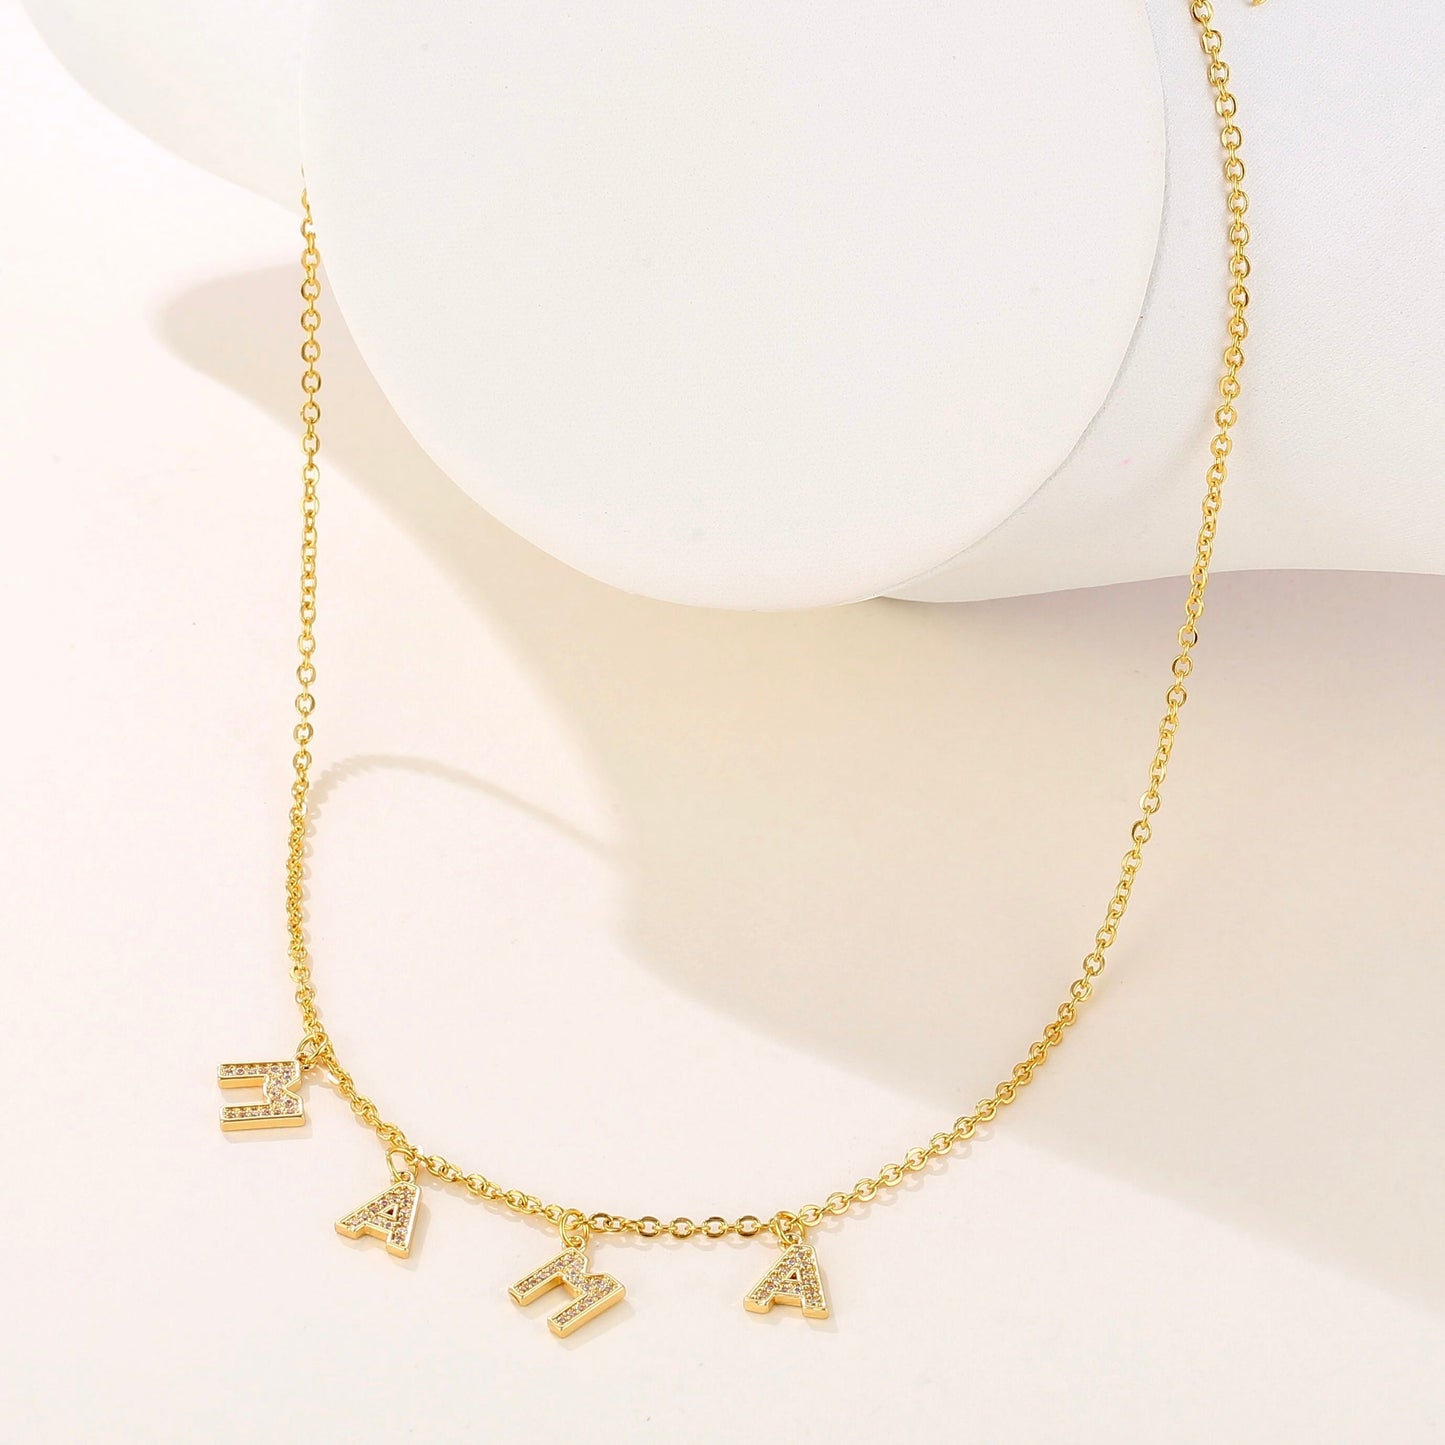 Get trendy with Mama Necklace -  available at Alma Ireland. Grab yours for €23.99 today!